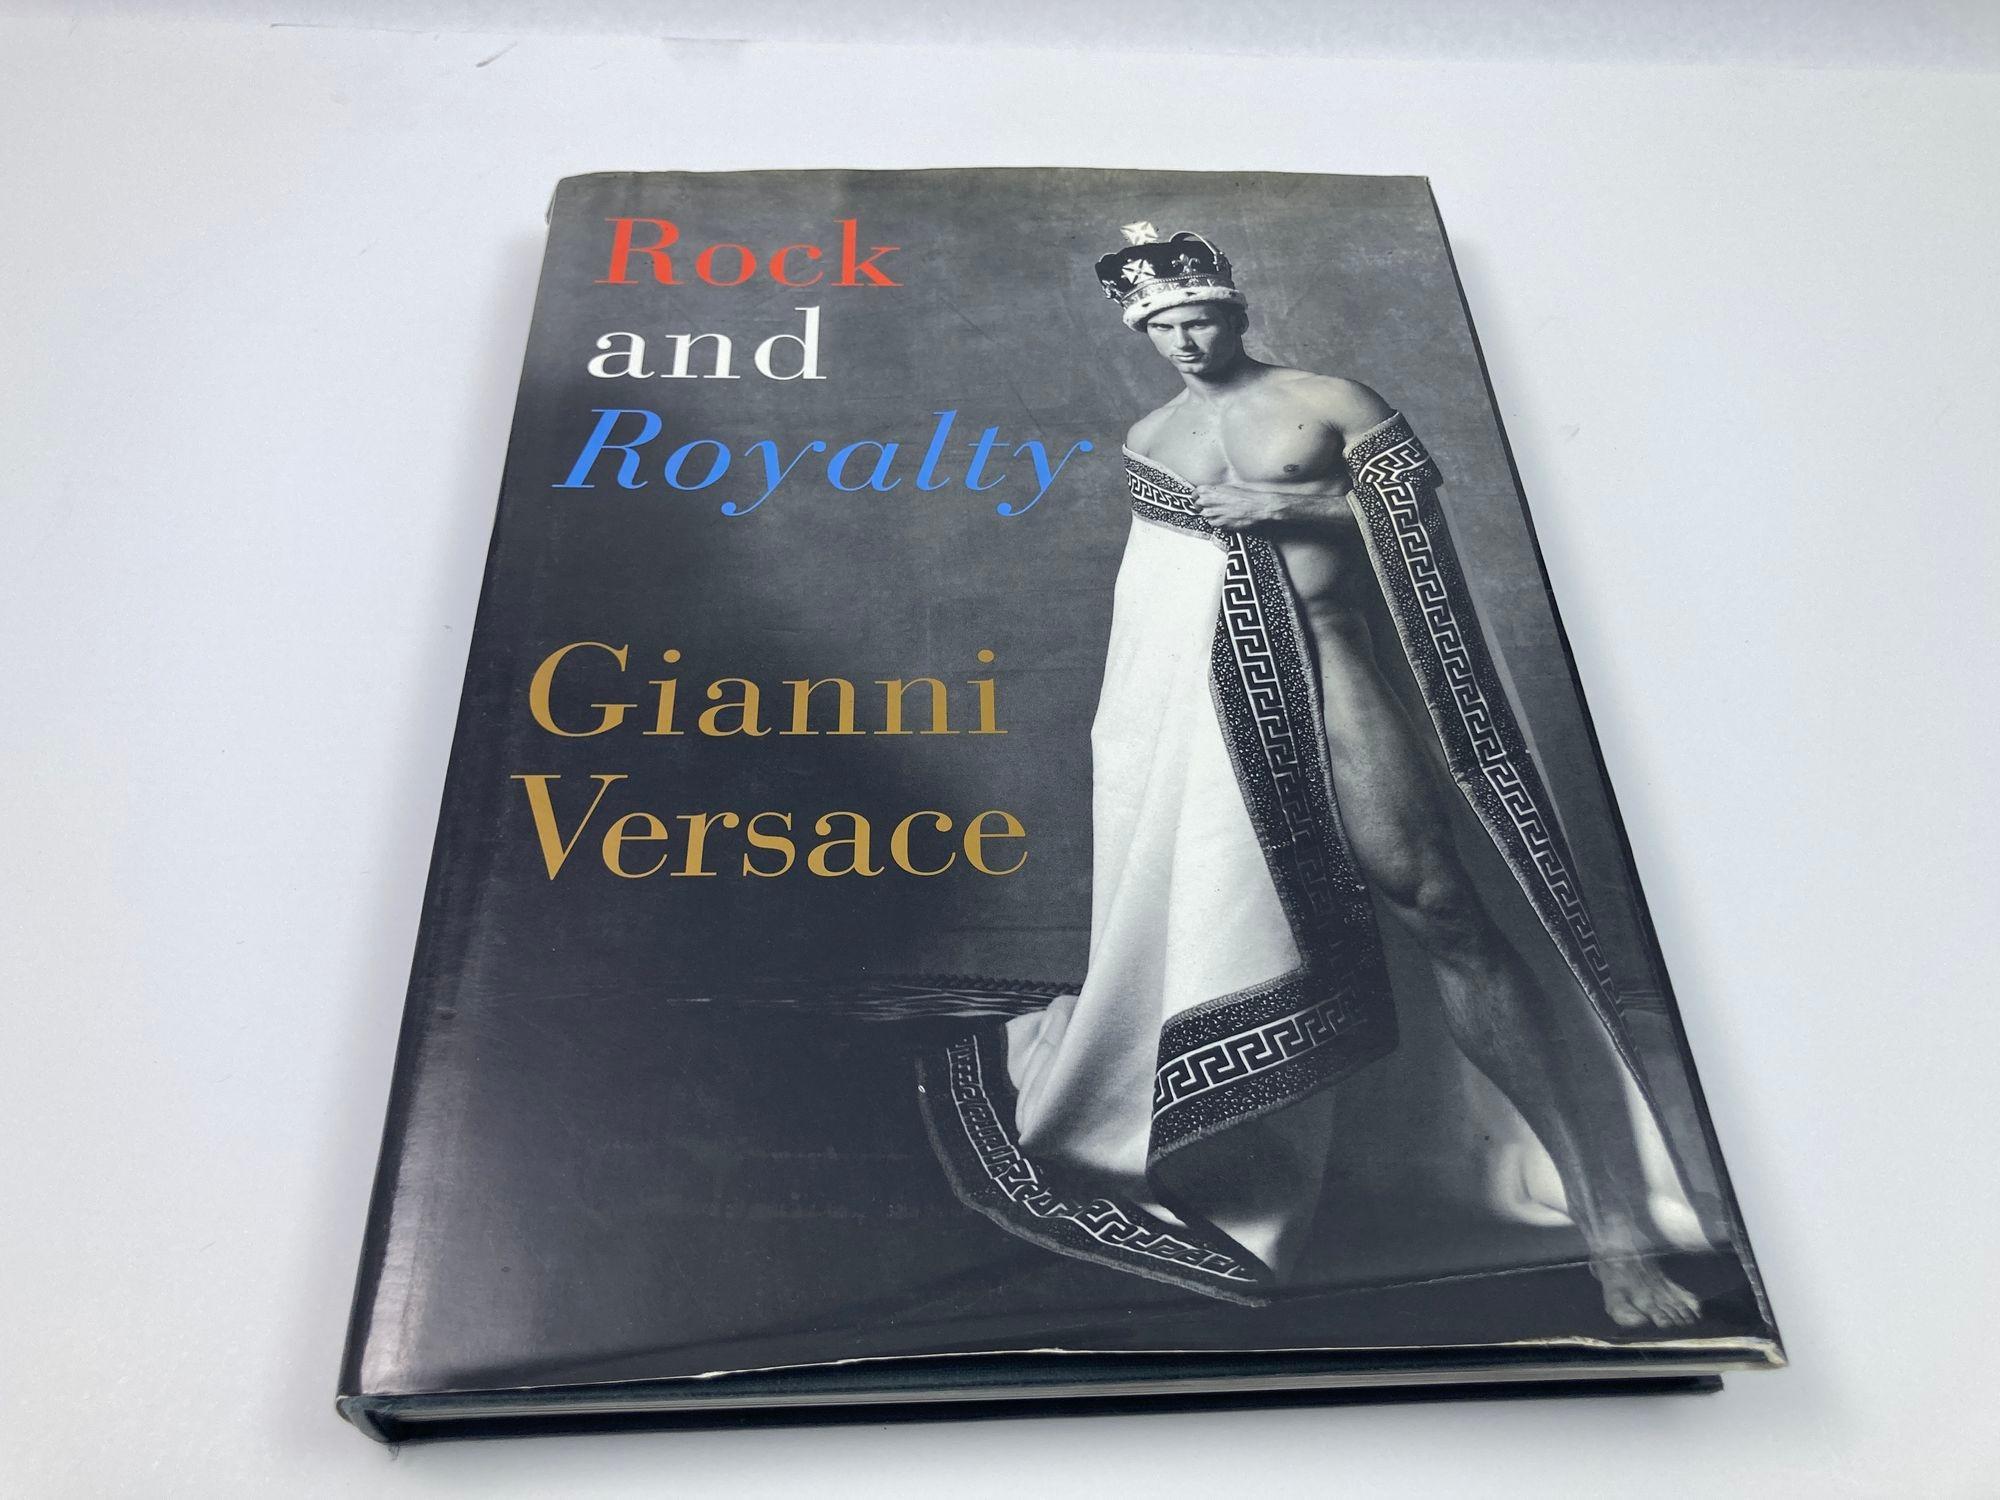 Rock and Royalty Gianni Versace Hardcover Table Book 1st Ed. Large Format For Sale 9